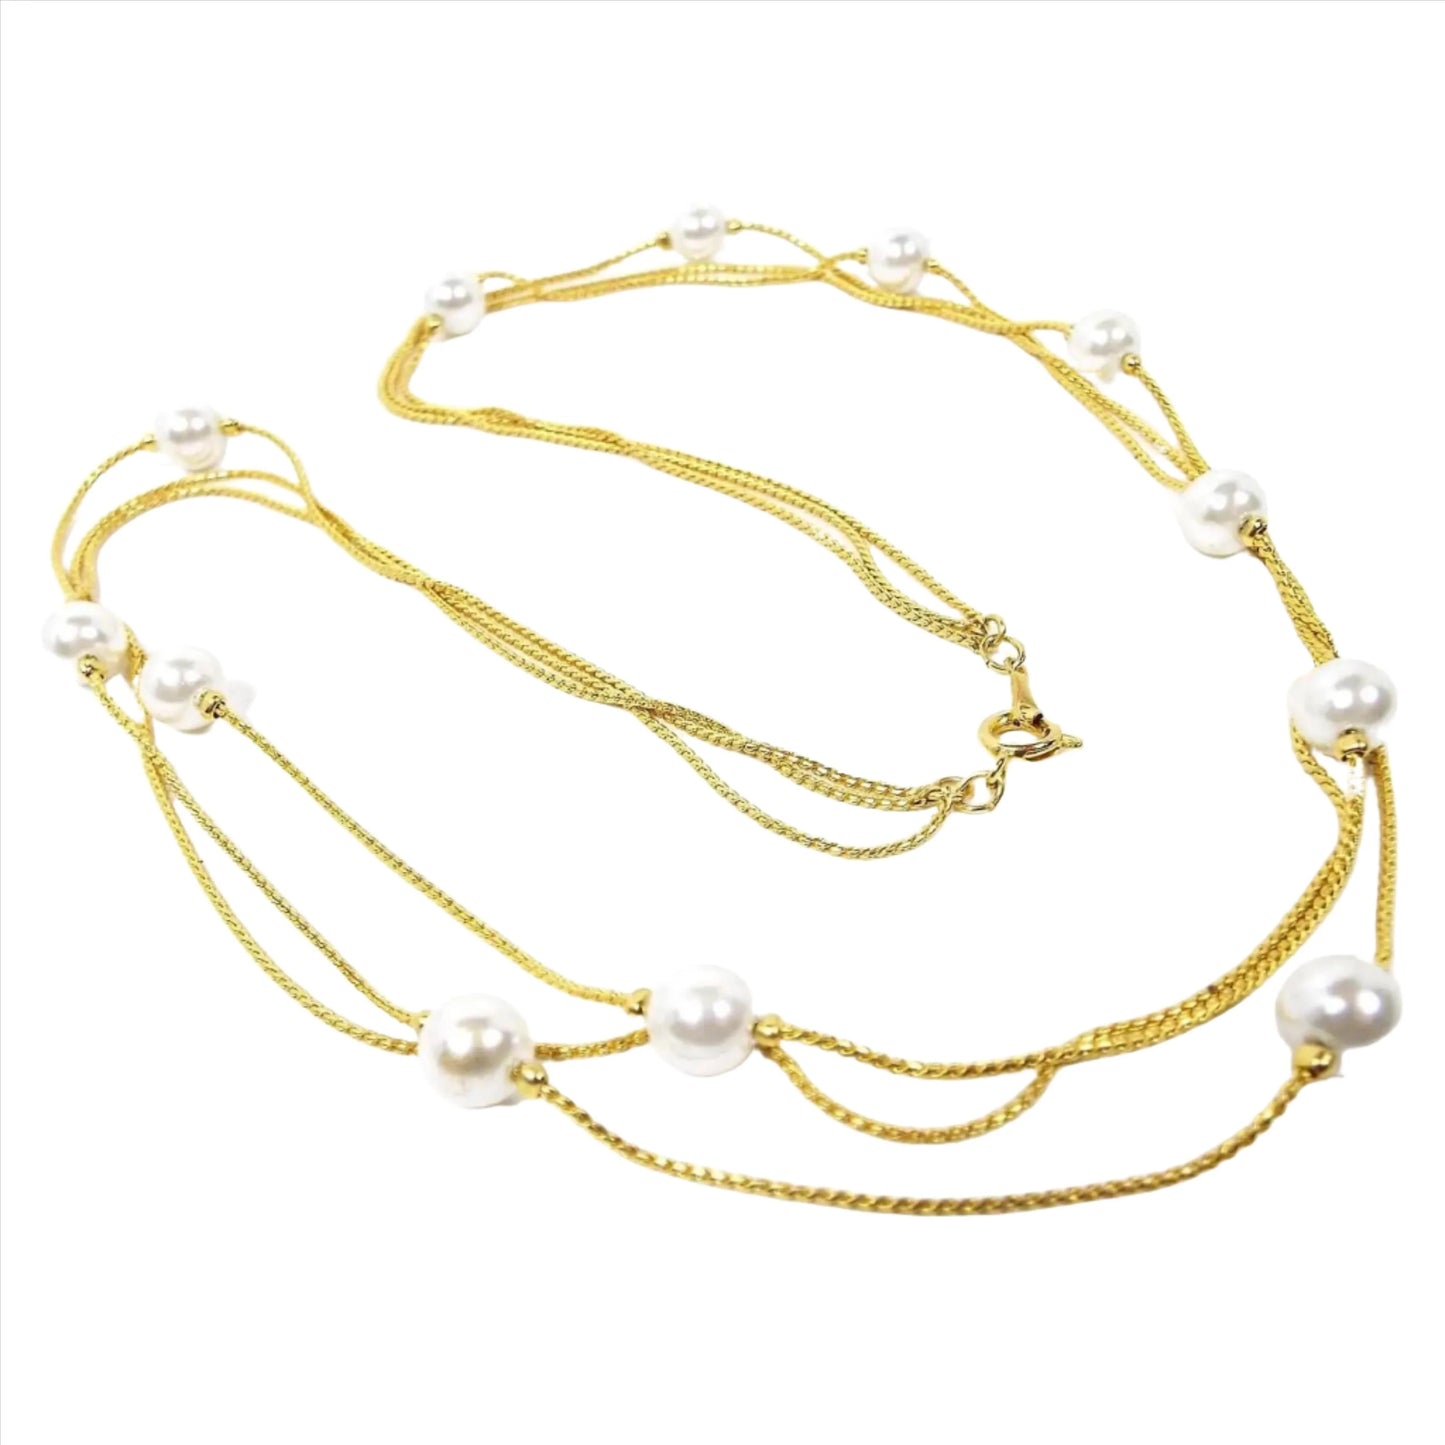 Retro vintage faux pearl beaded chain necklace. It has three thin strands of serpentine chain in gold tone color metal. The imitation pearl beads are scattered here and there throughout the necklace and are pearly white plastic. There is a spring ring clasp at the end.